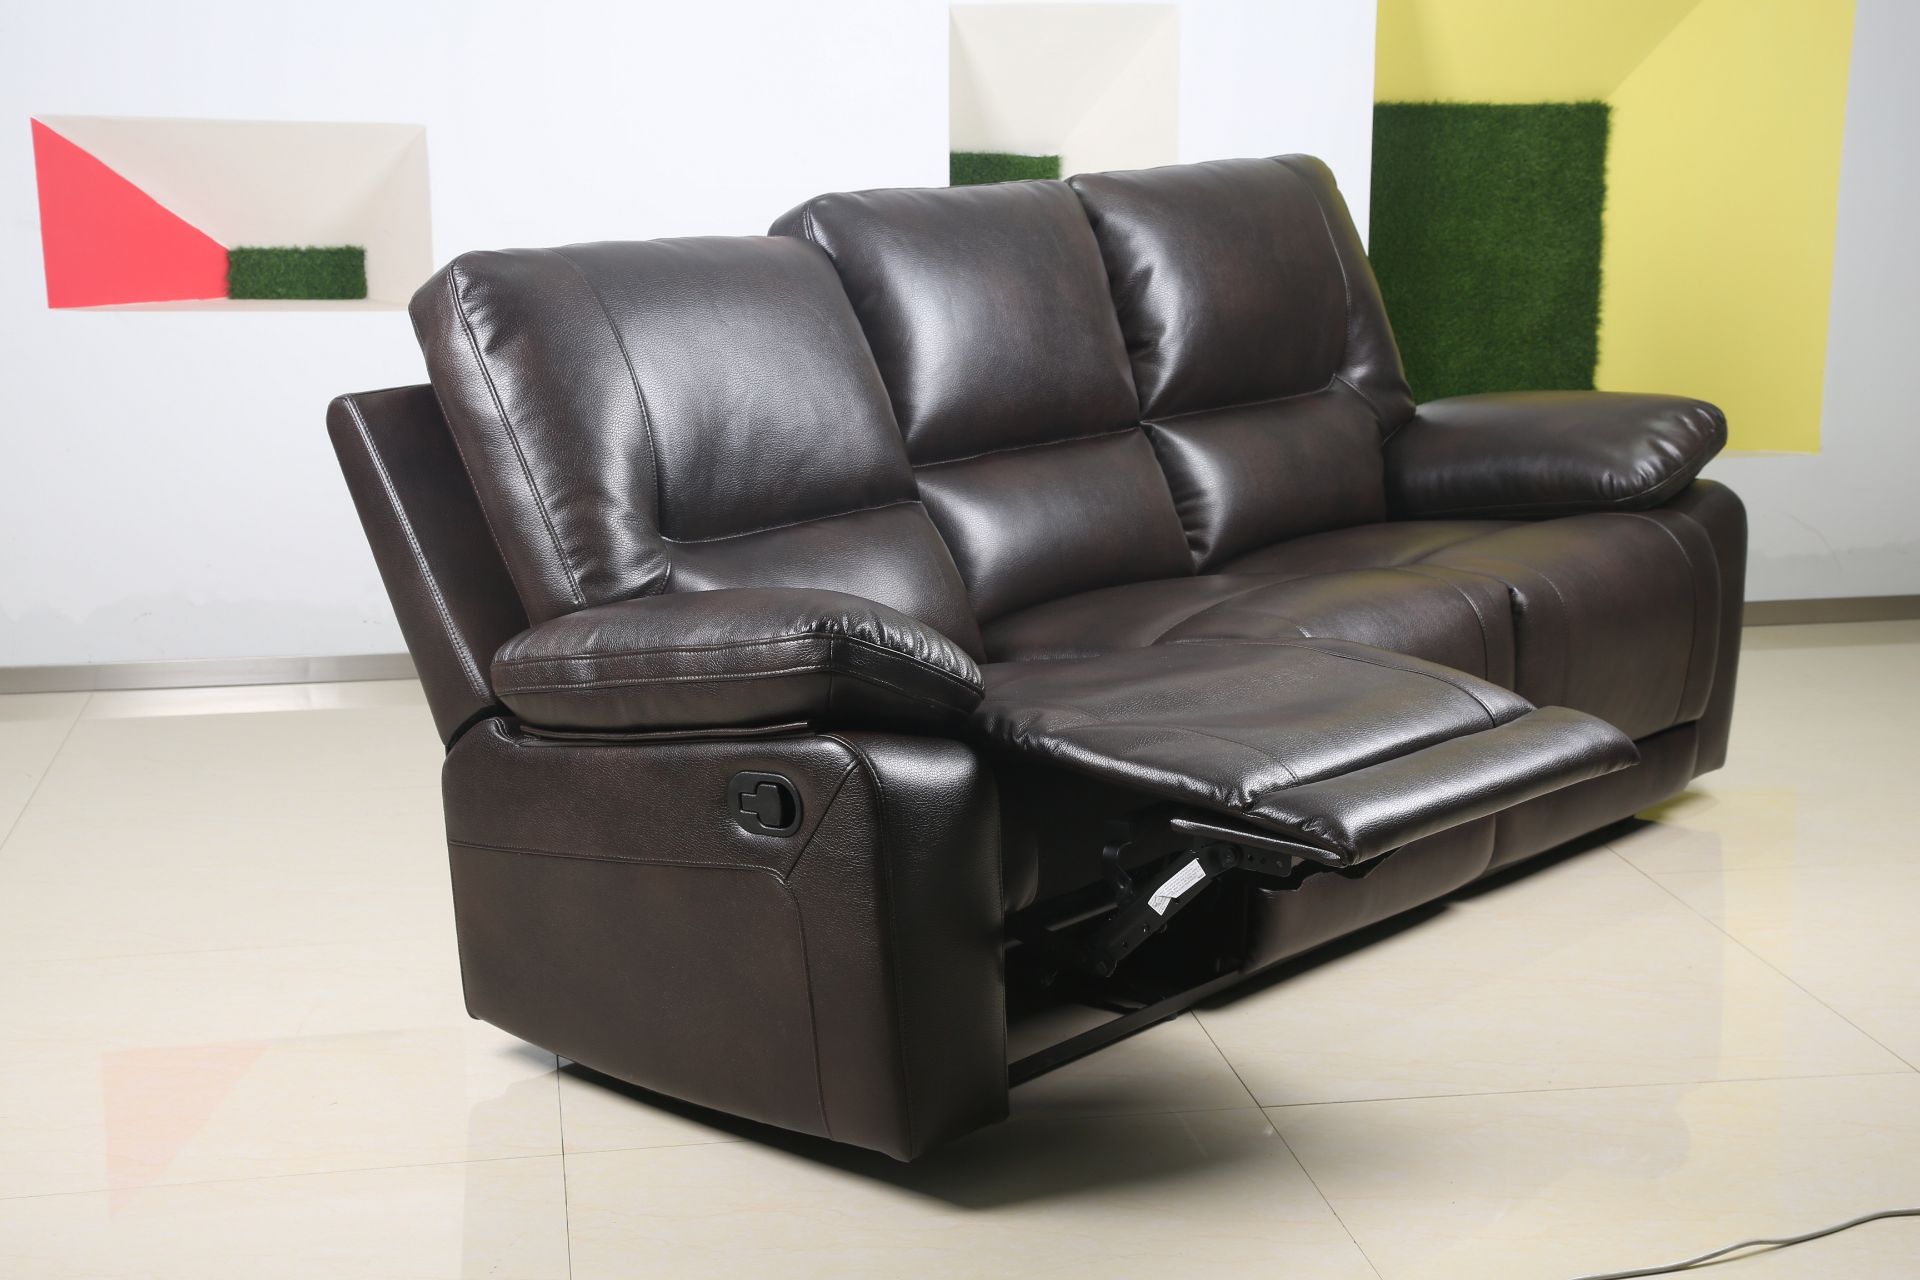 Leanne 3 seater leather reclining sofa in expresso brown